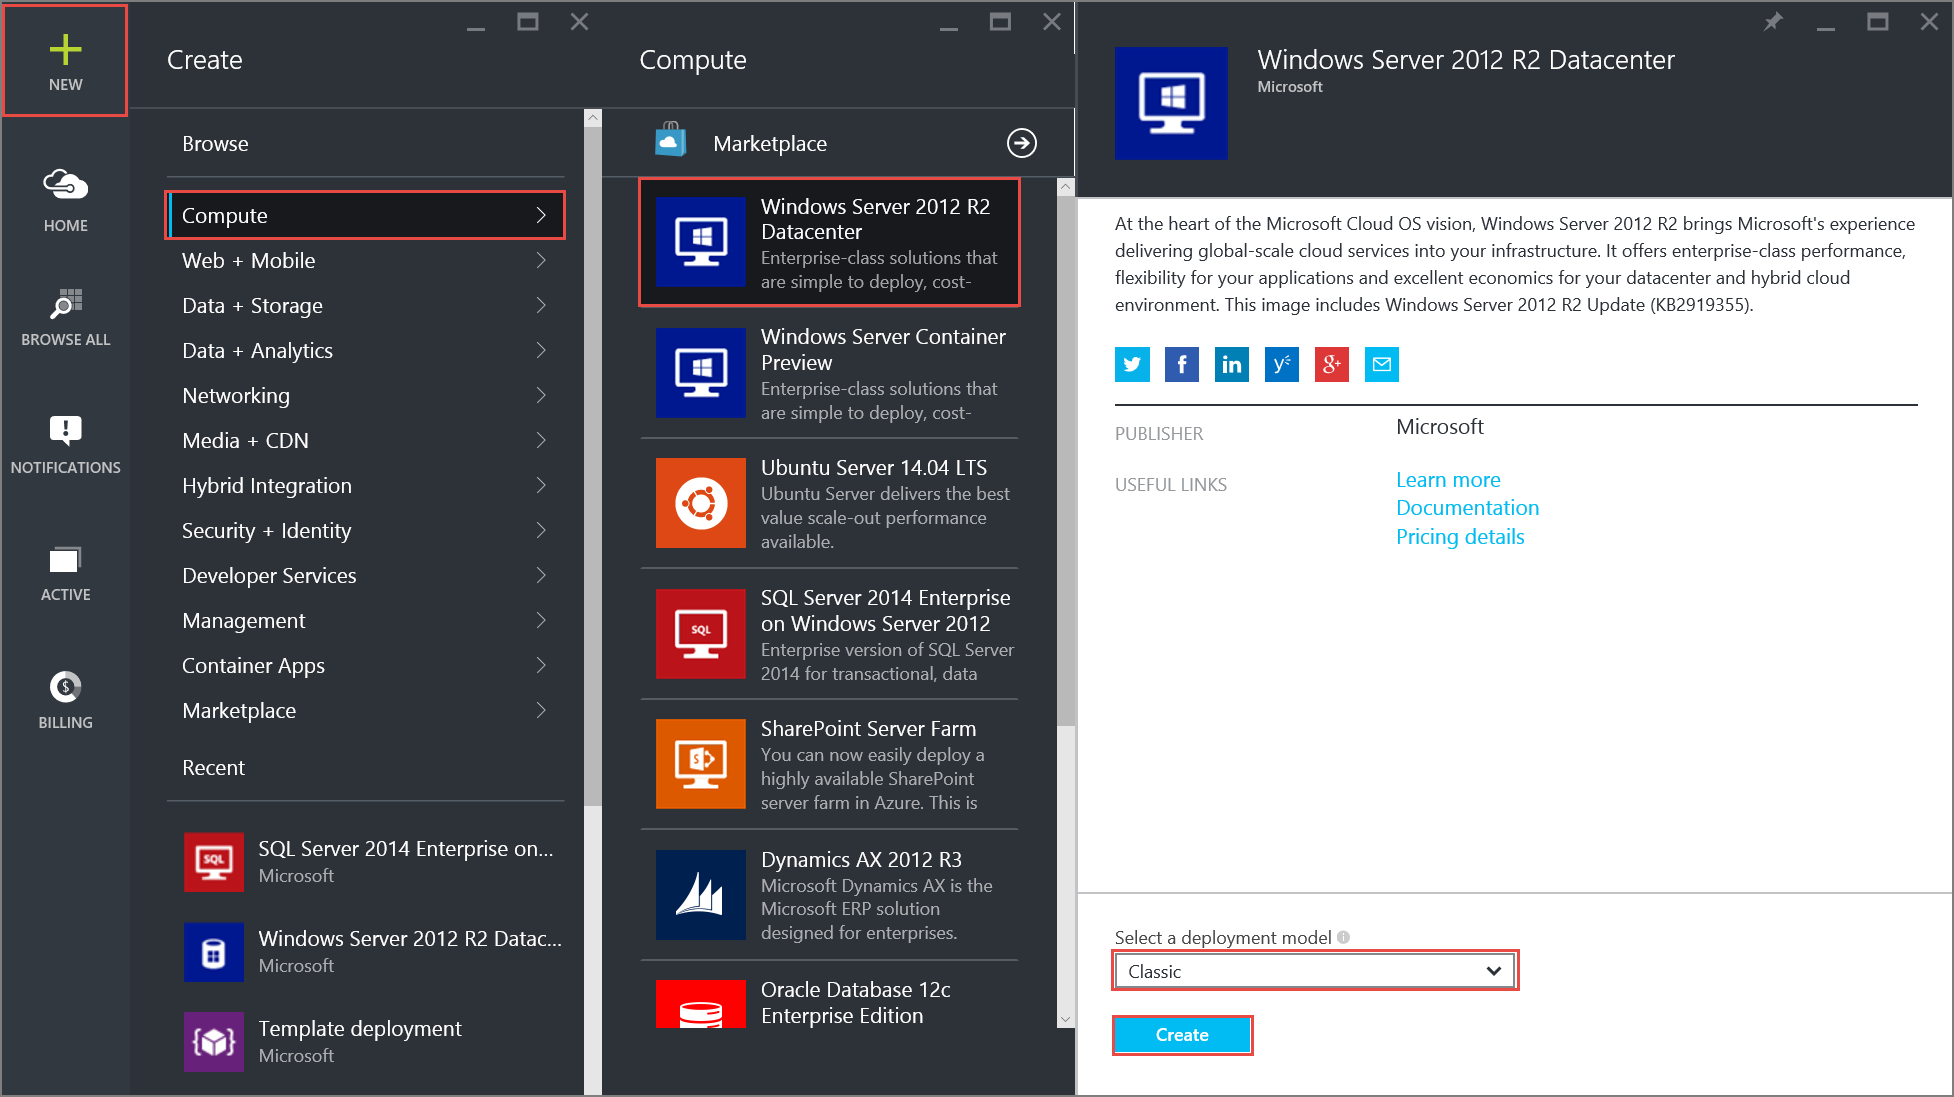 Screenshot that shows the Azure portal with the New > Compute > Windows Server 2012 R2 Datacenter tile highlighted.